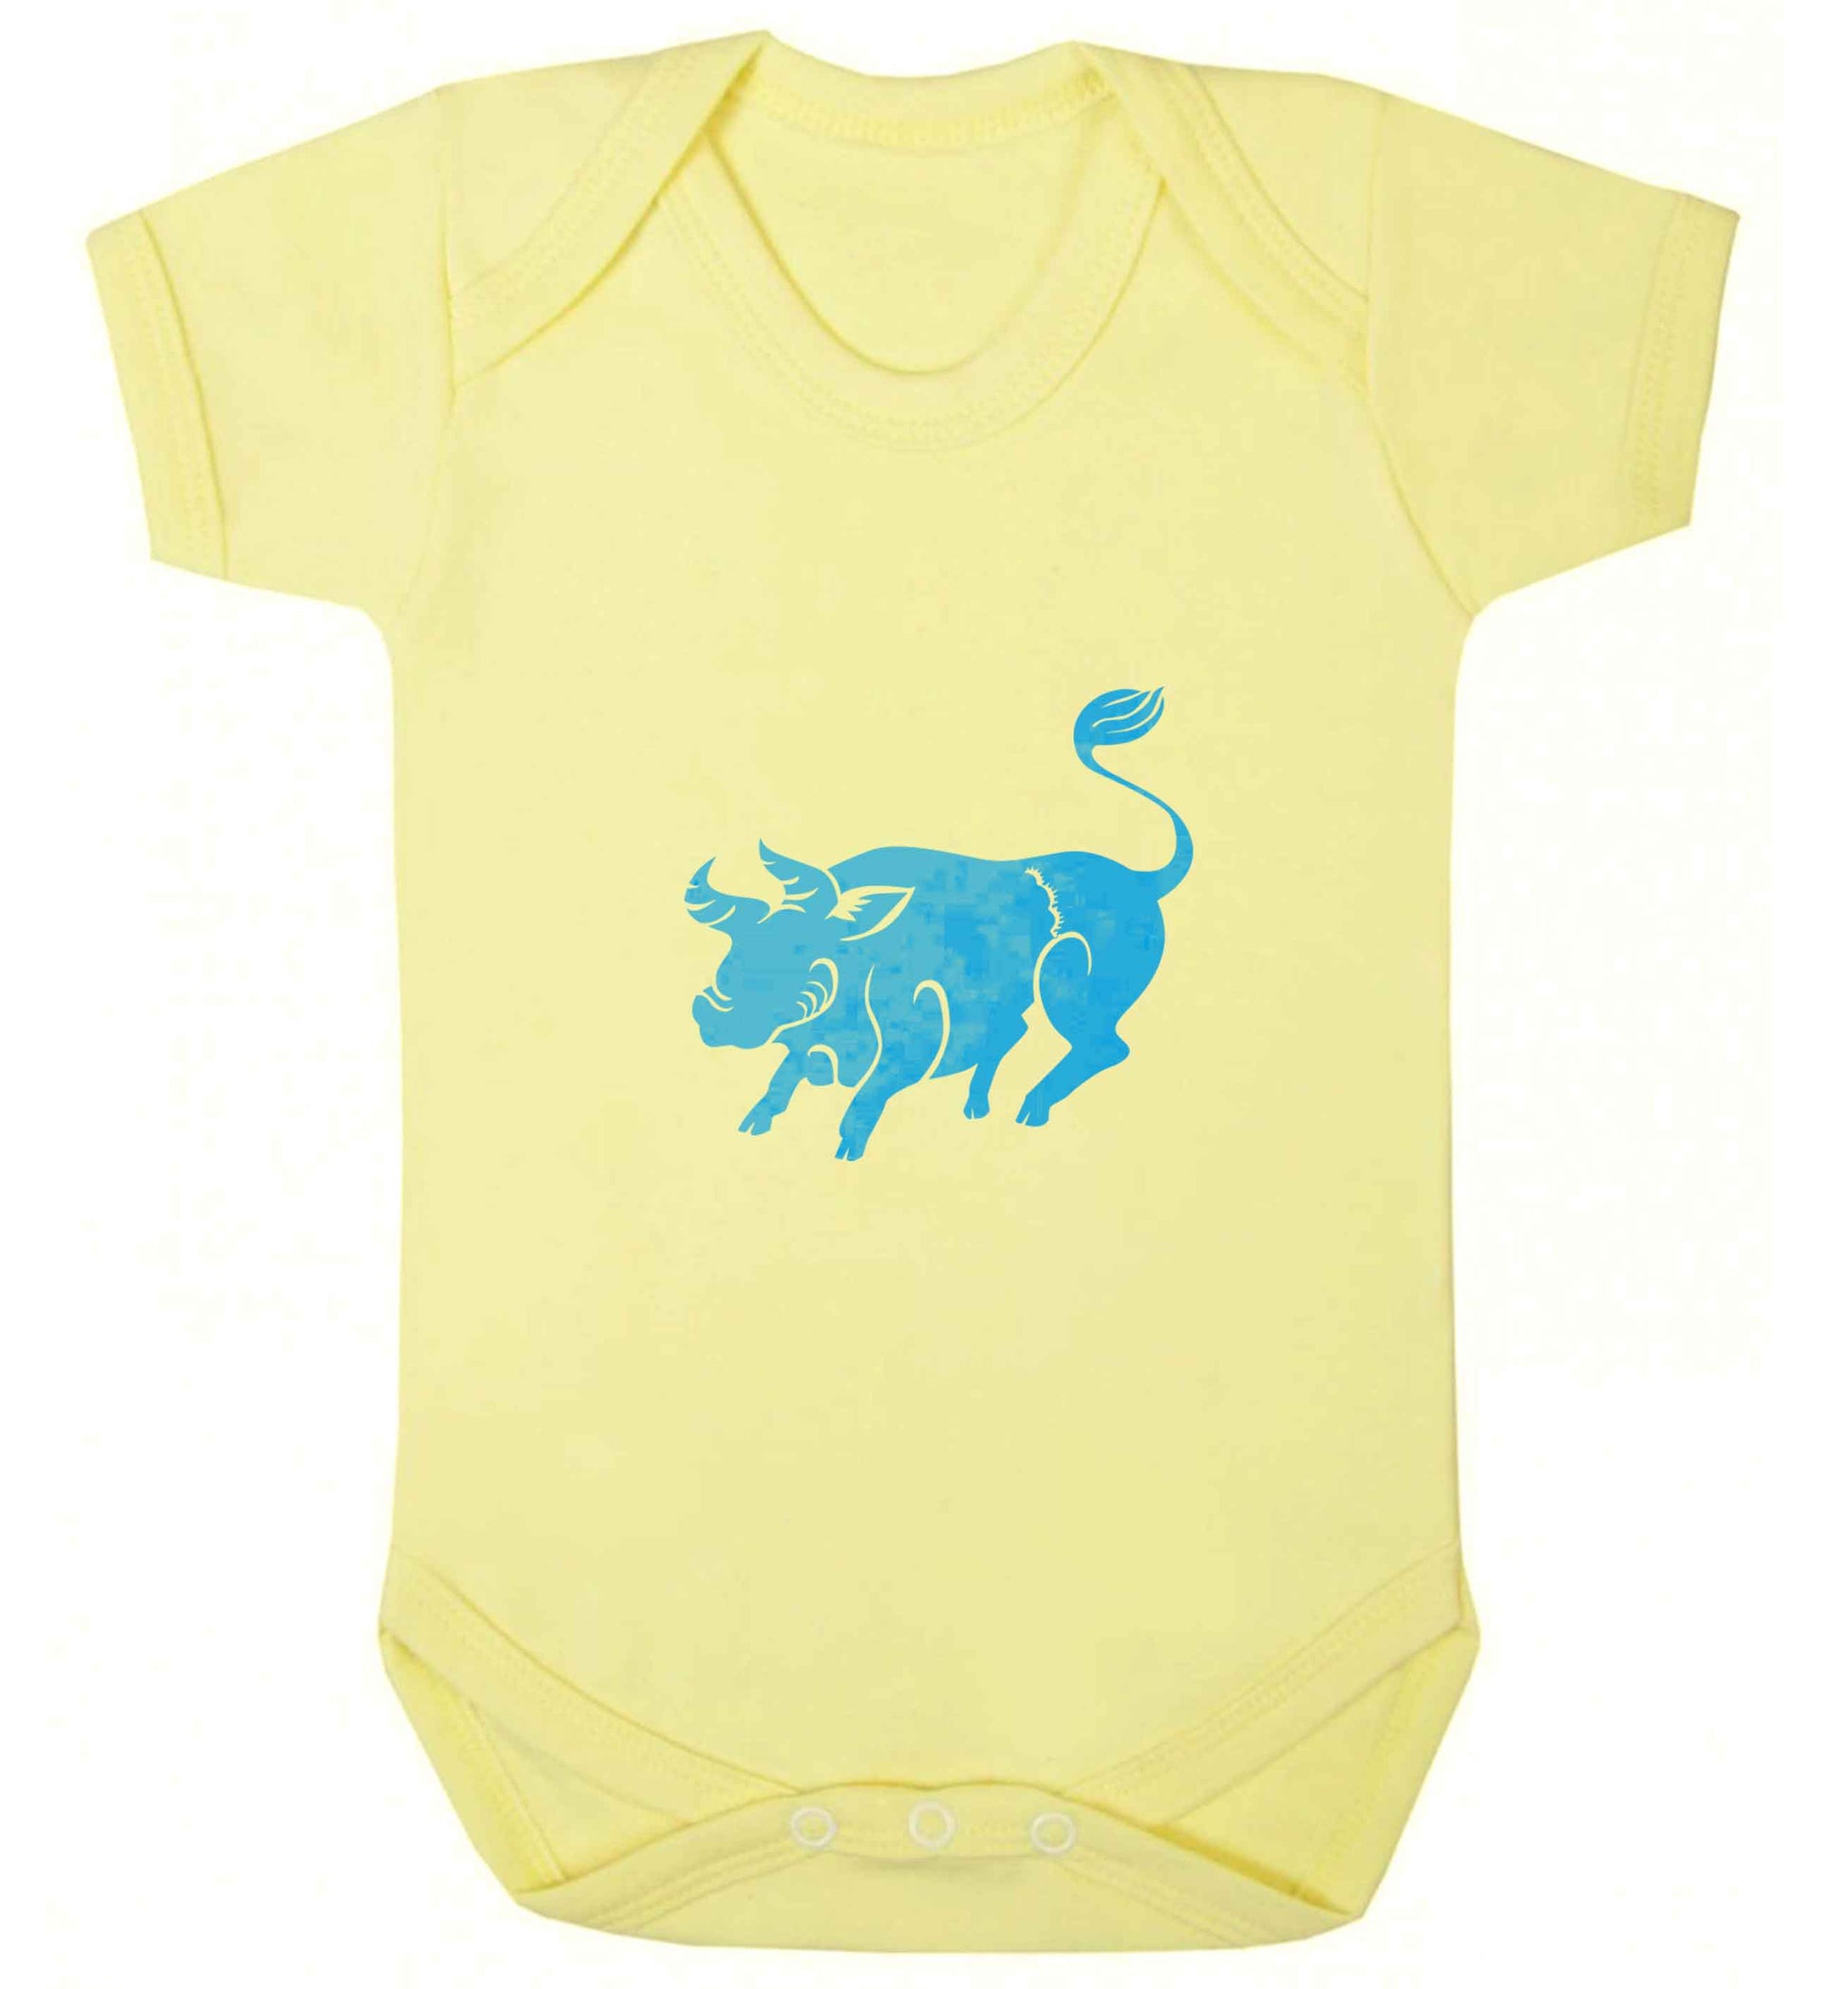 Blue ox baby vest pale yellow 18-24 months